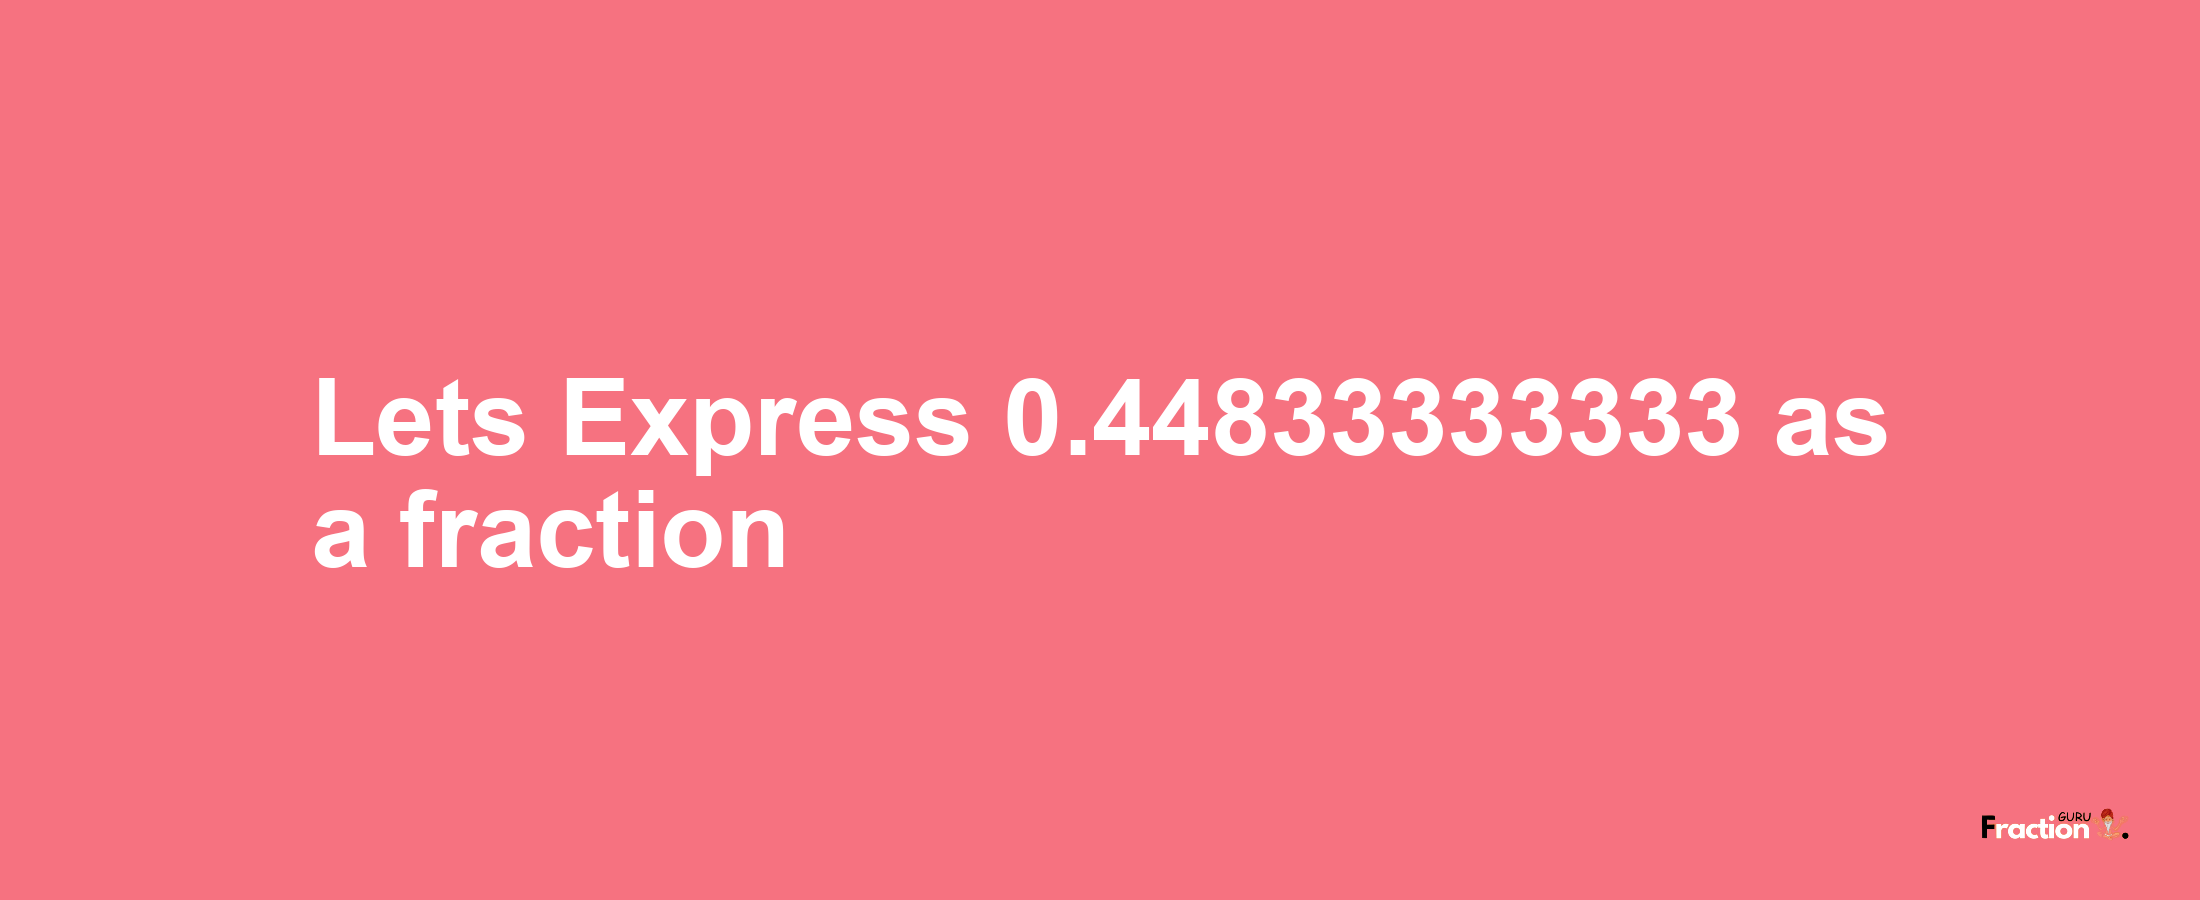 Lets Express 0.44833333333 as afraction